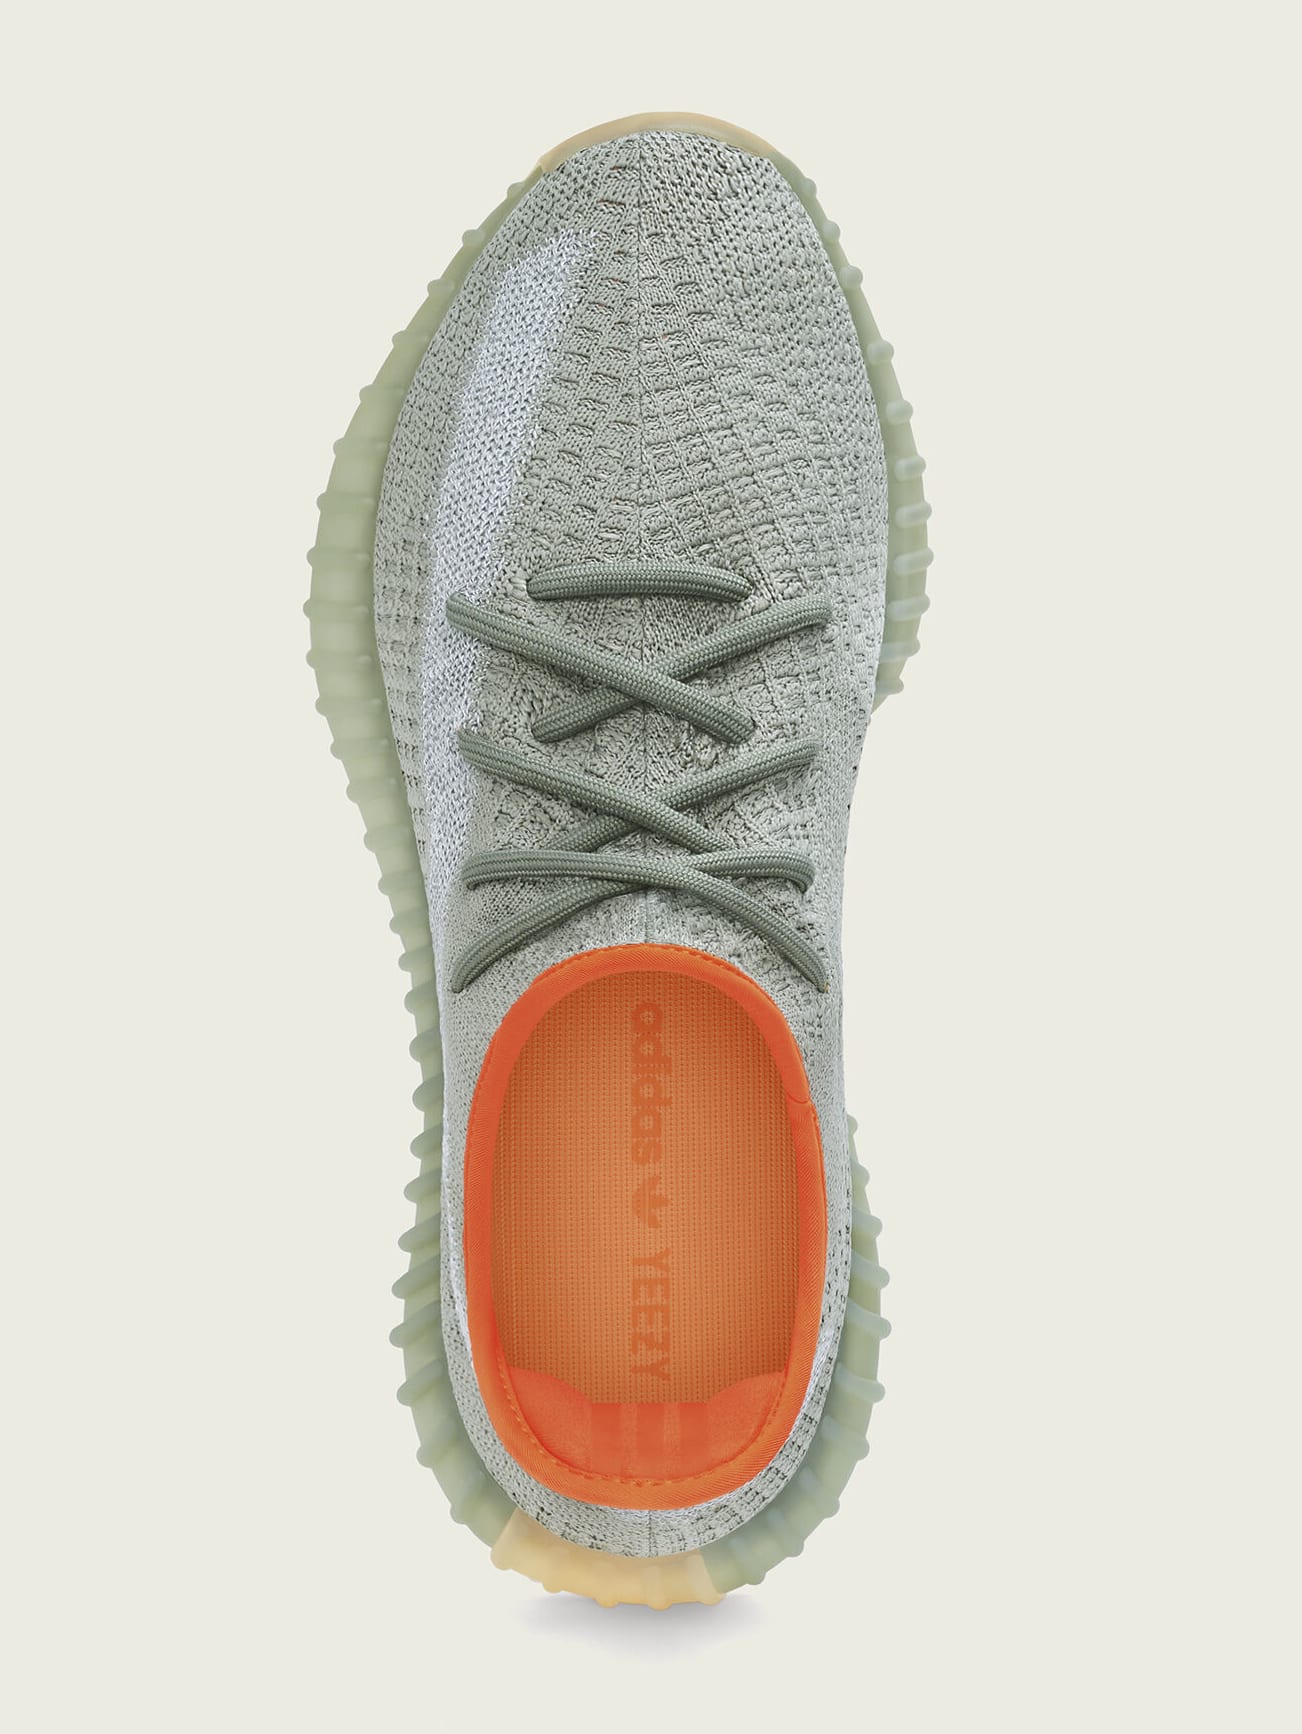 yeezy coming out in march